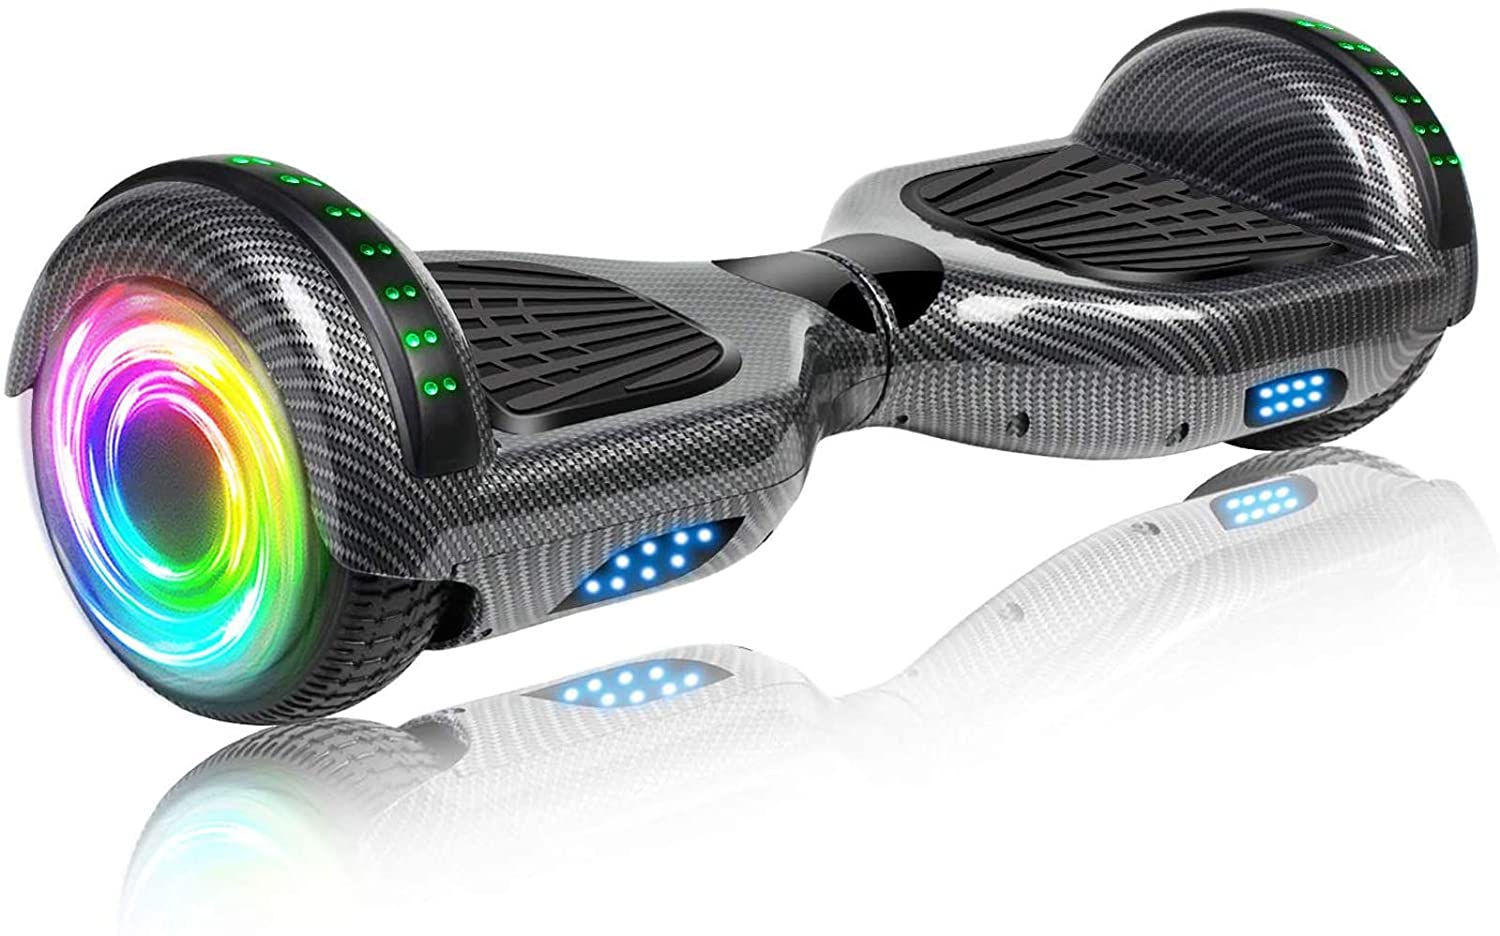 SISIGAD Hoverboard WIth Bluetooth  [#1 Best Seller] – Best All Terrain Hoverboard Under $200